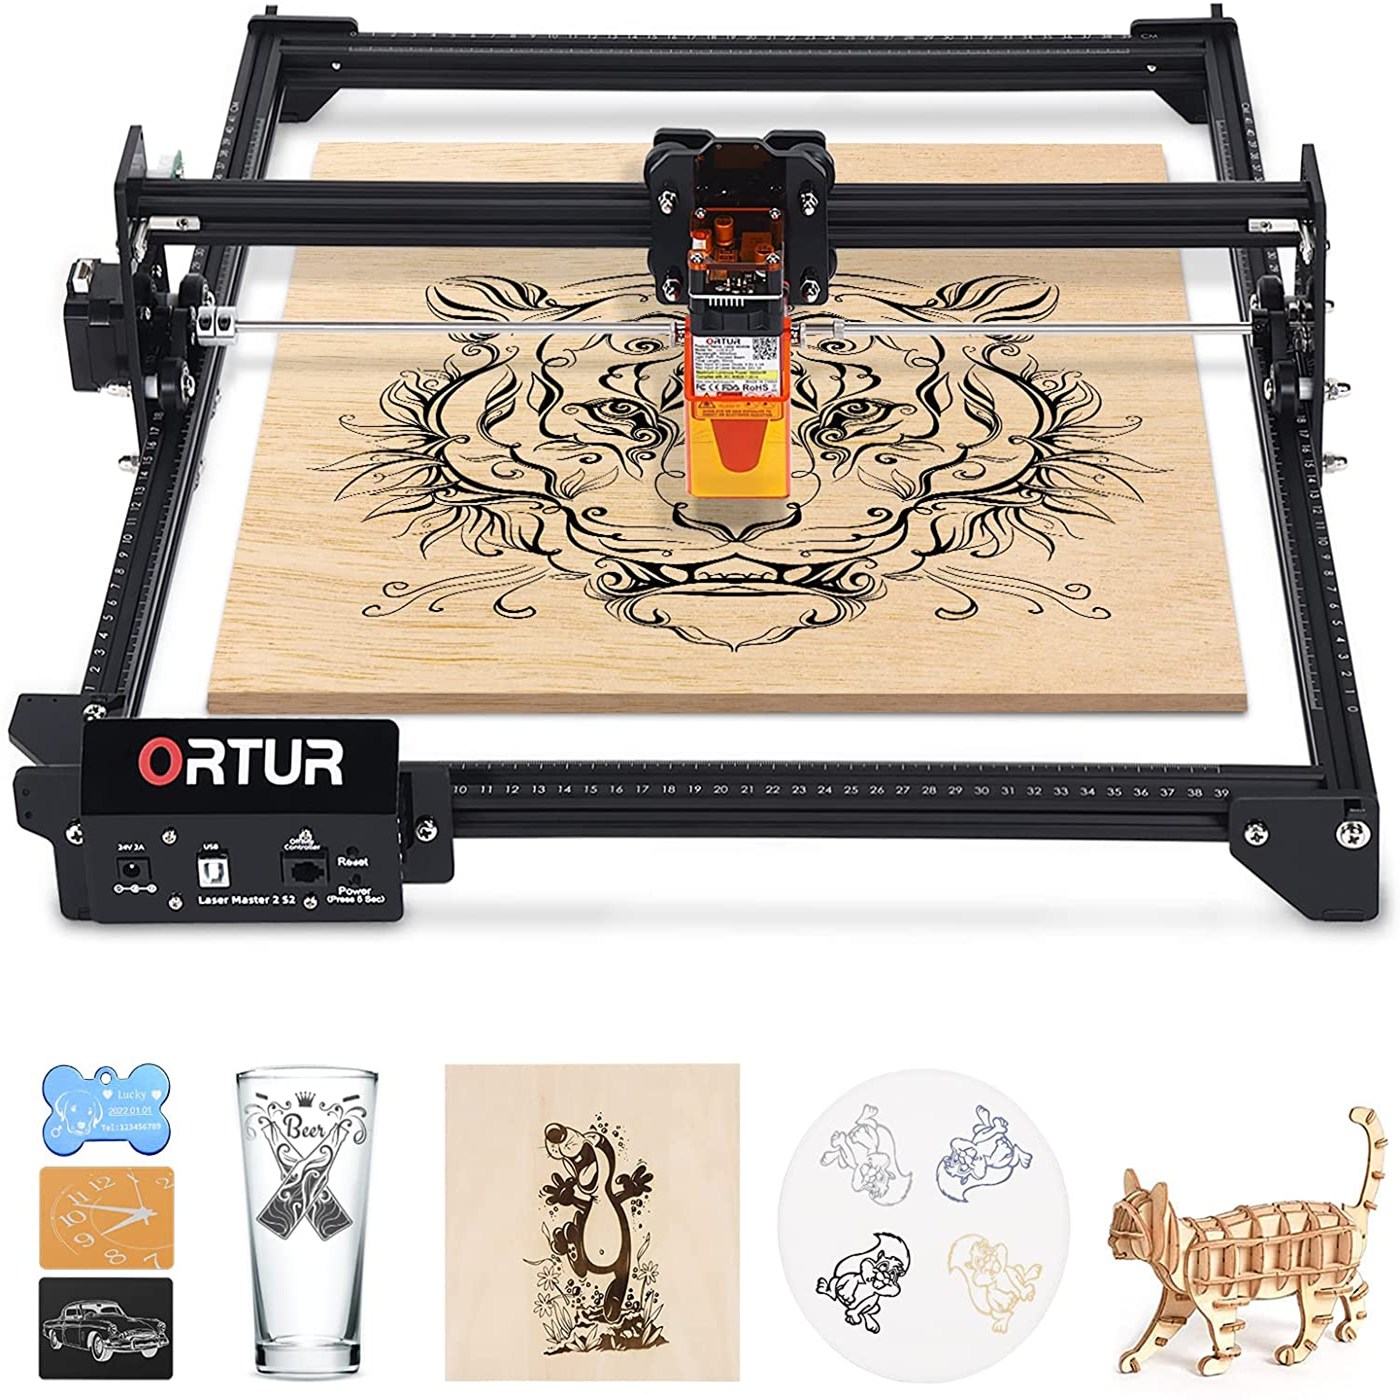 Find EU DIRECT ORTUR Laser Master 2 Pro S2 LU2 4 LF Upgraded Laser Engraving Cutting Machine Cutter 400 x 430mm Large Engraving Area Fast Speed High Precision Laser Engraver for Sale on Gipsybee.com with cryptocurrencies